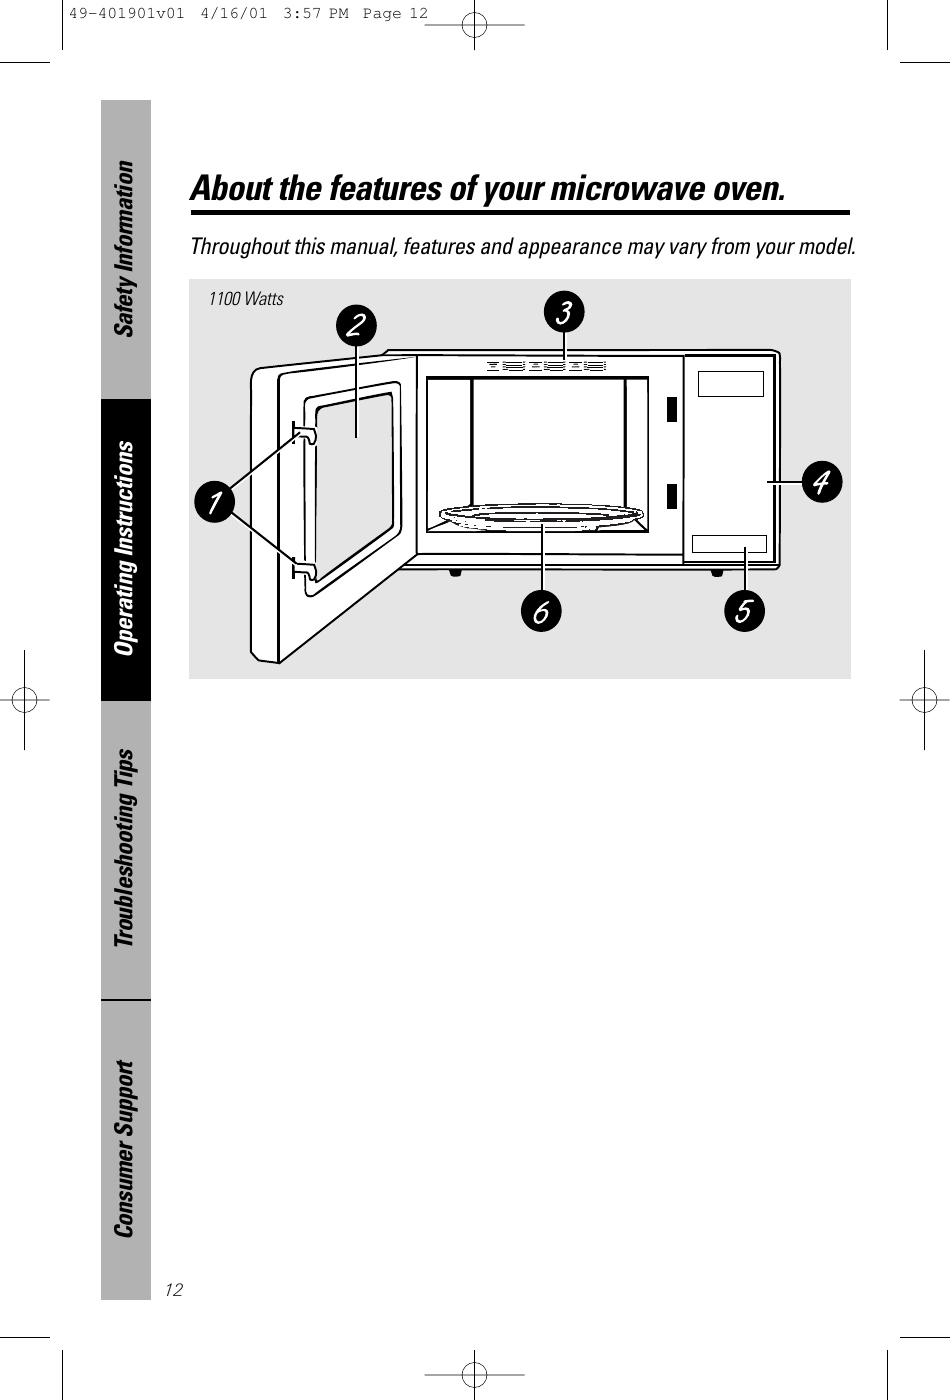 12Safety InformationOperating InstructionsTroubleshooting TipsConsumer SupportAbout the features of your microwave oven.Throughout this manual, features and appearance may vary from your model.1100 Watts49-401901v01  4/16/01  3:57 PM  Page 12